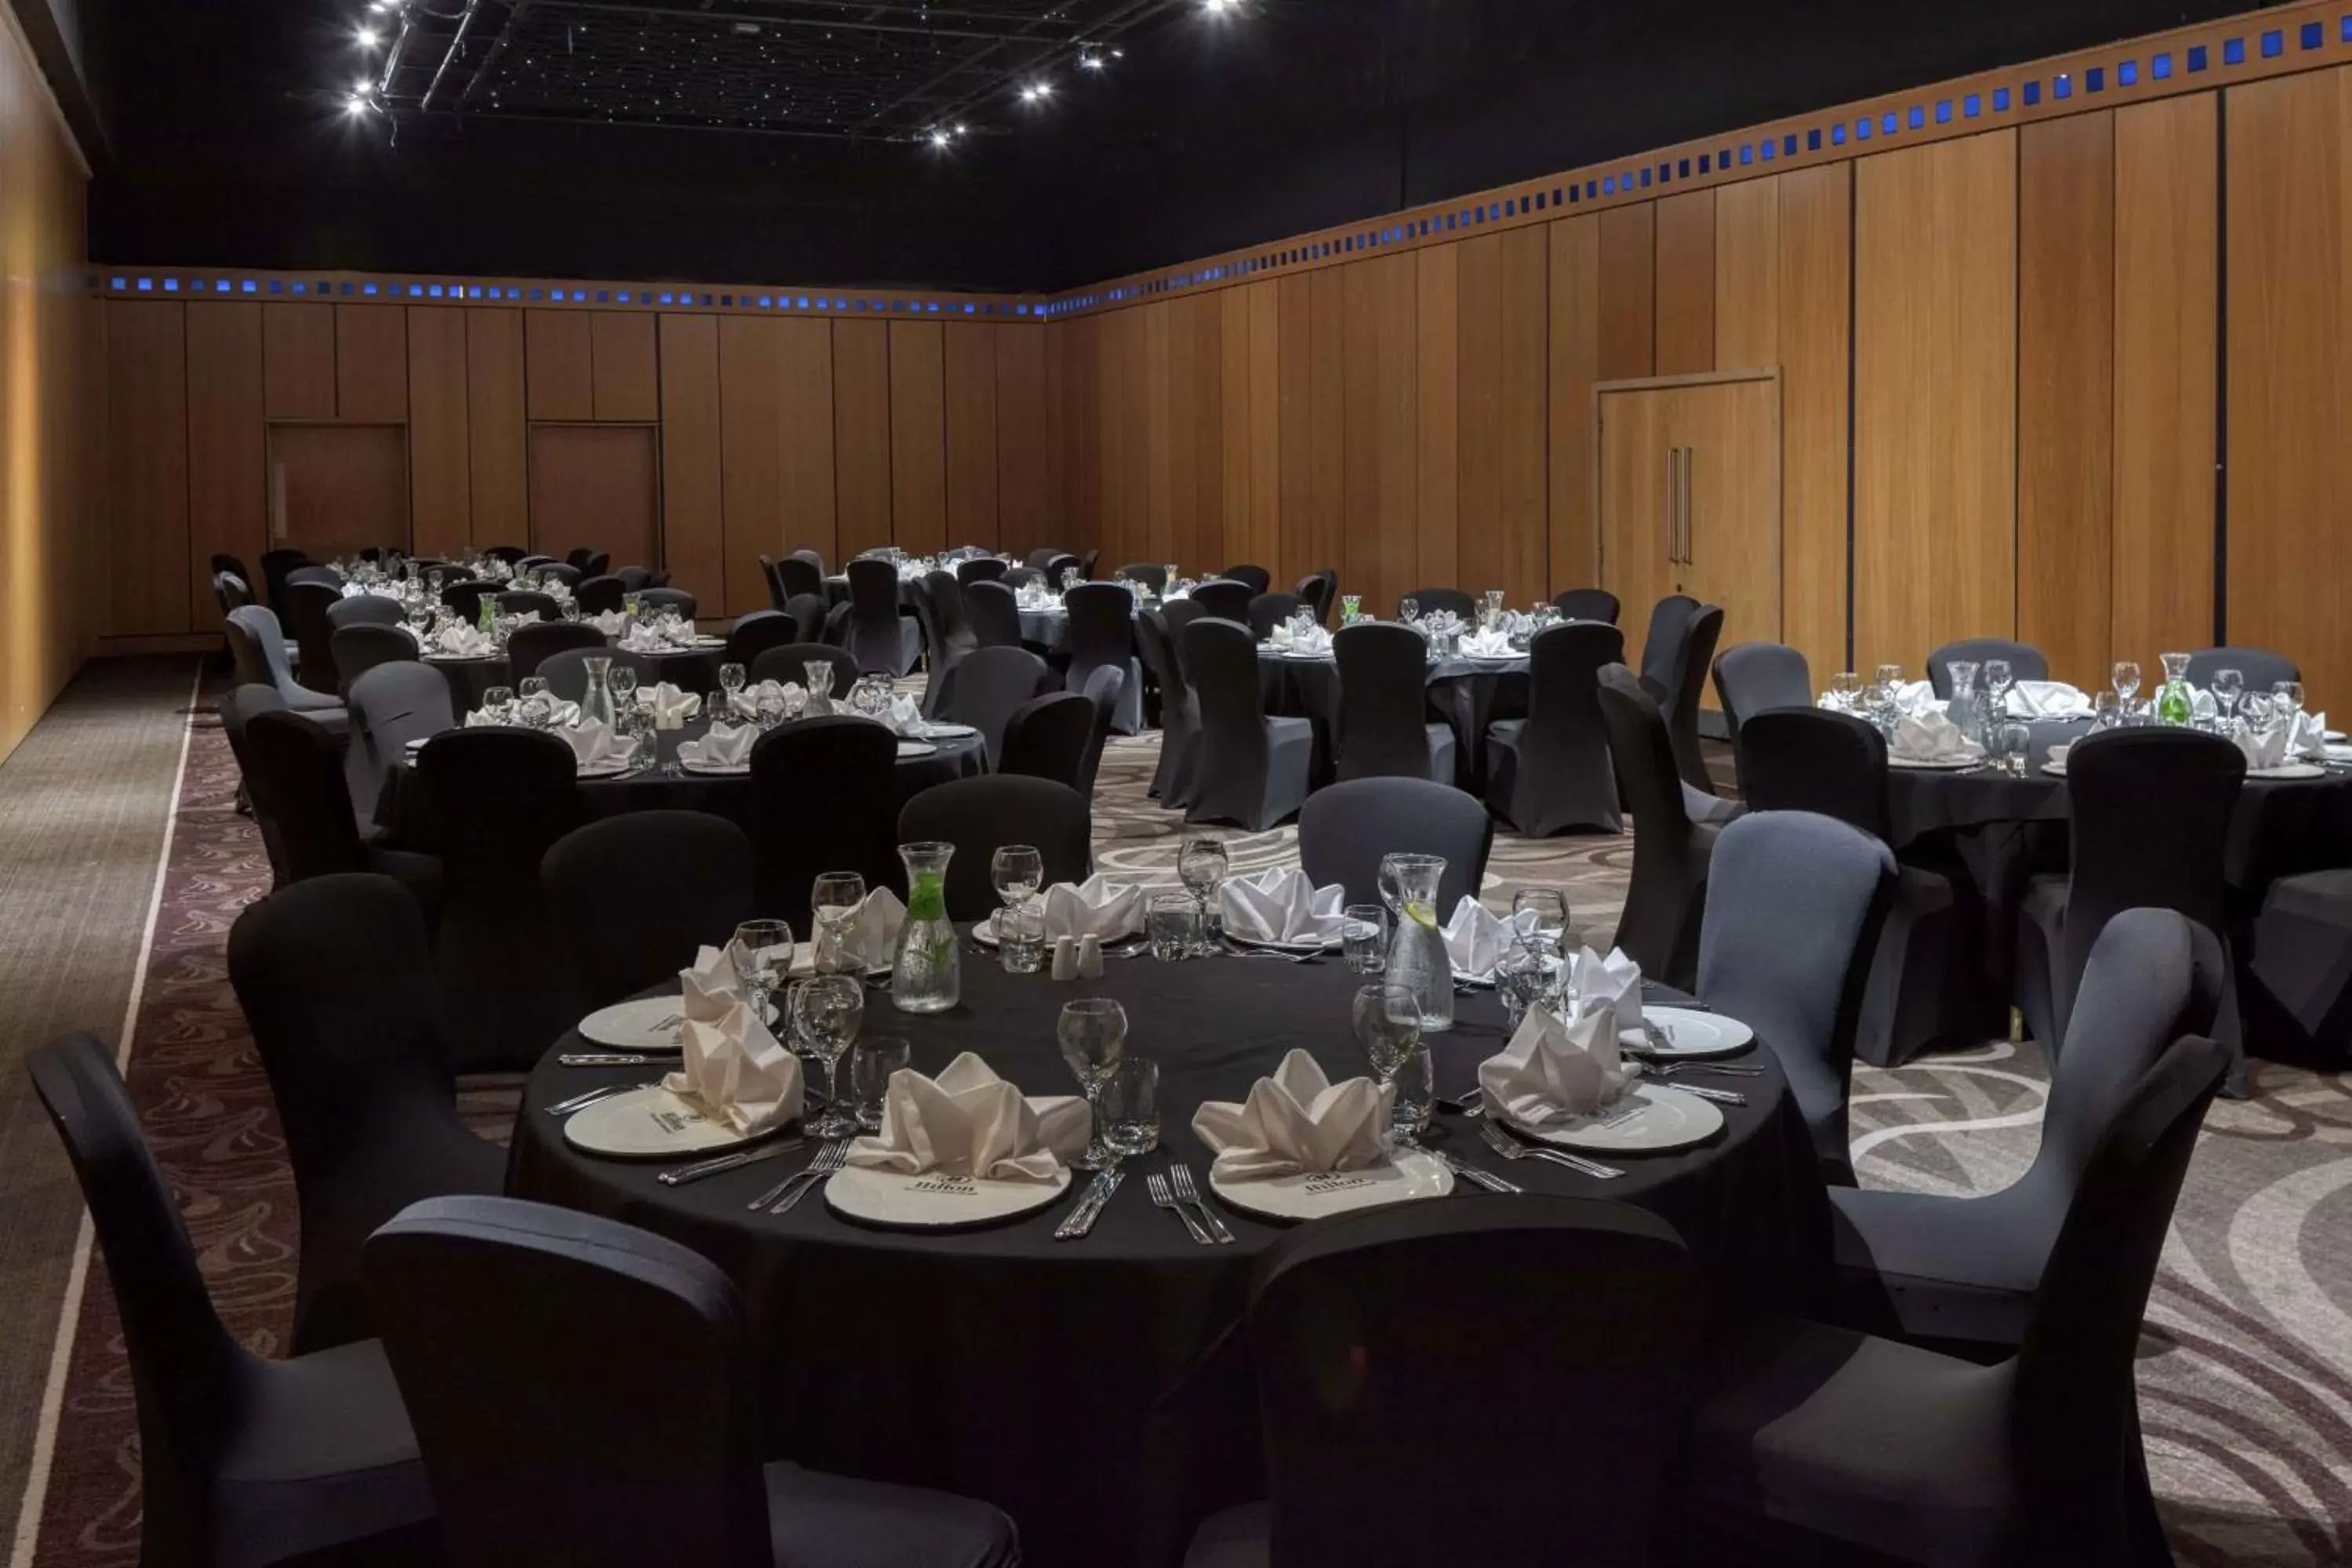 Meeting/conference room, Banquet Facilities in Hilton Newcastle Gateshead